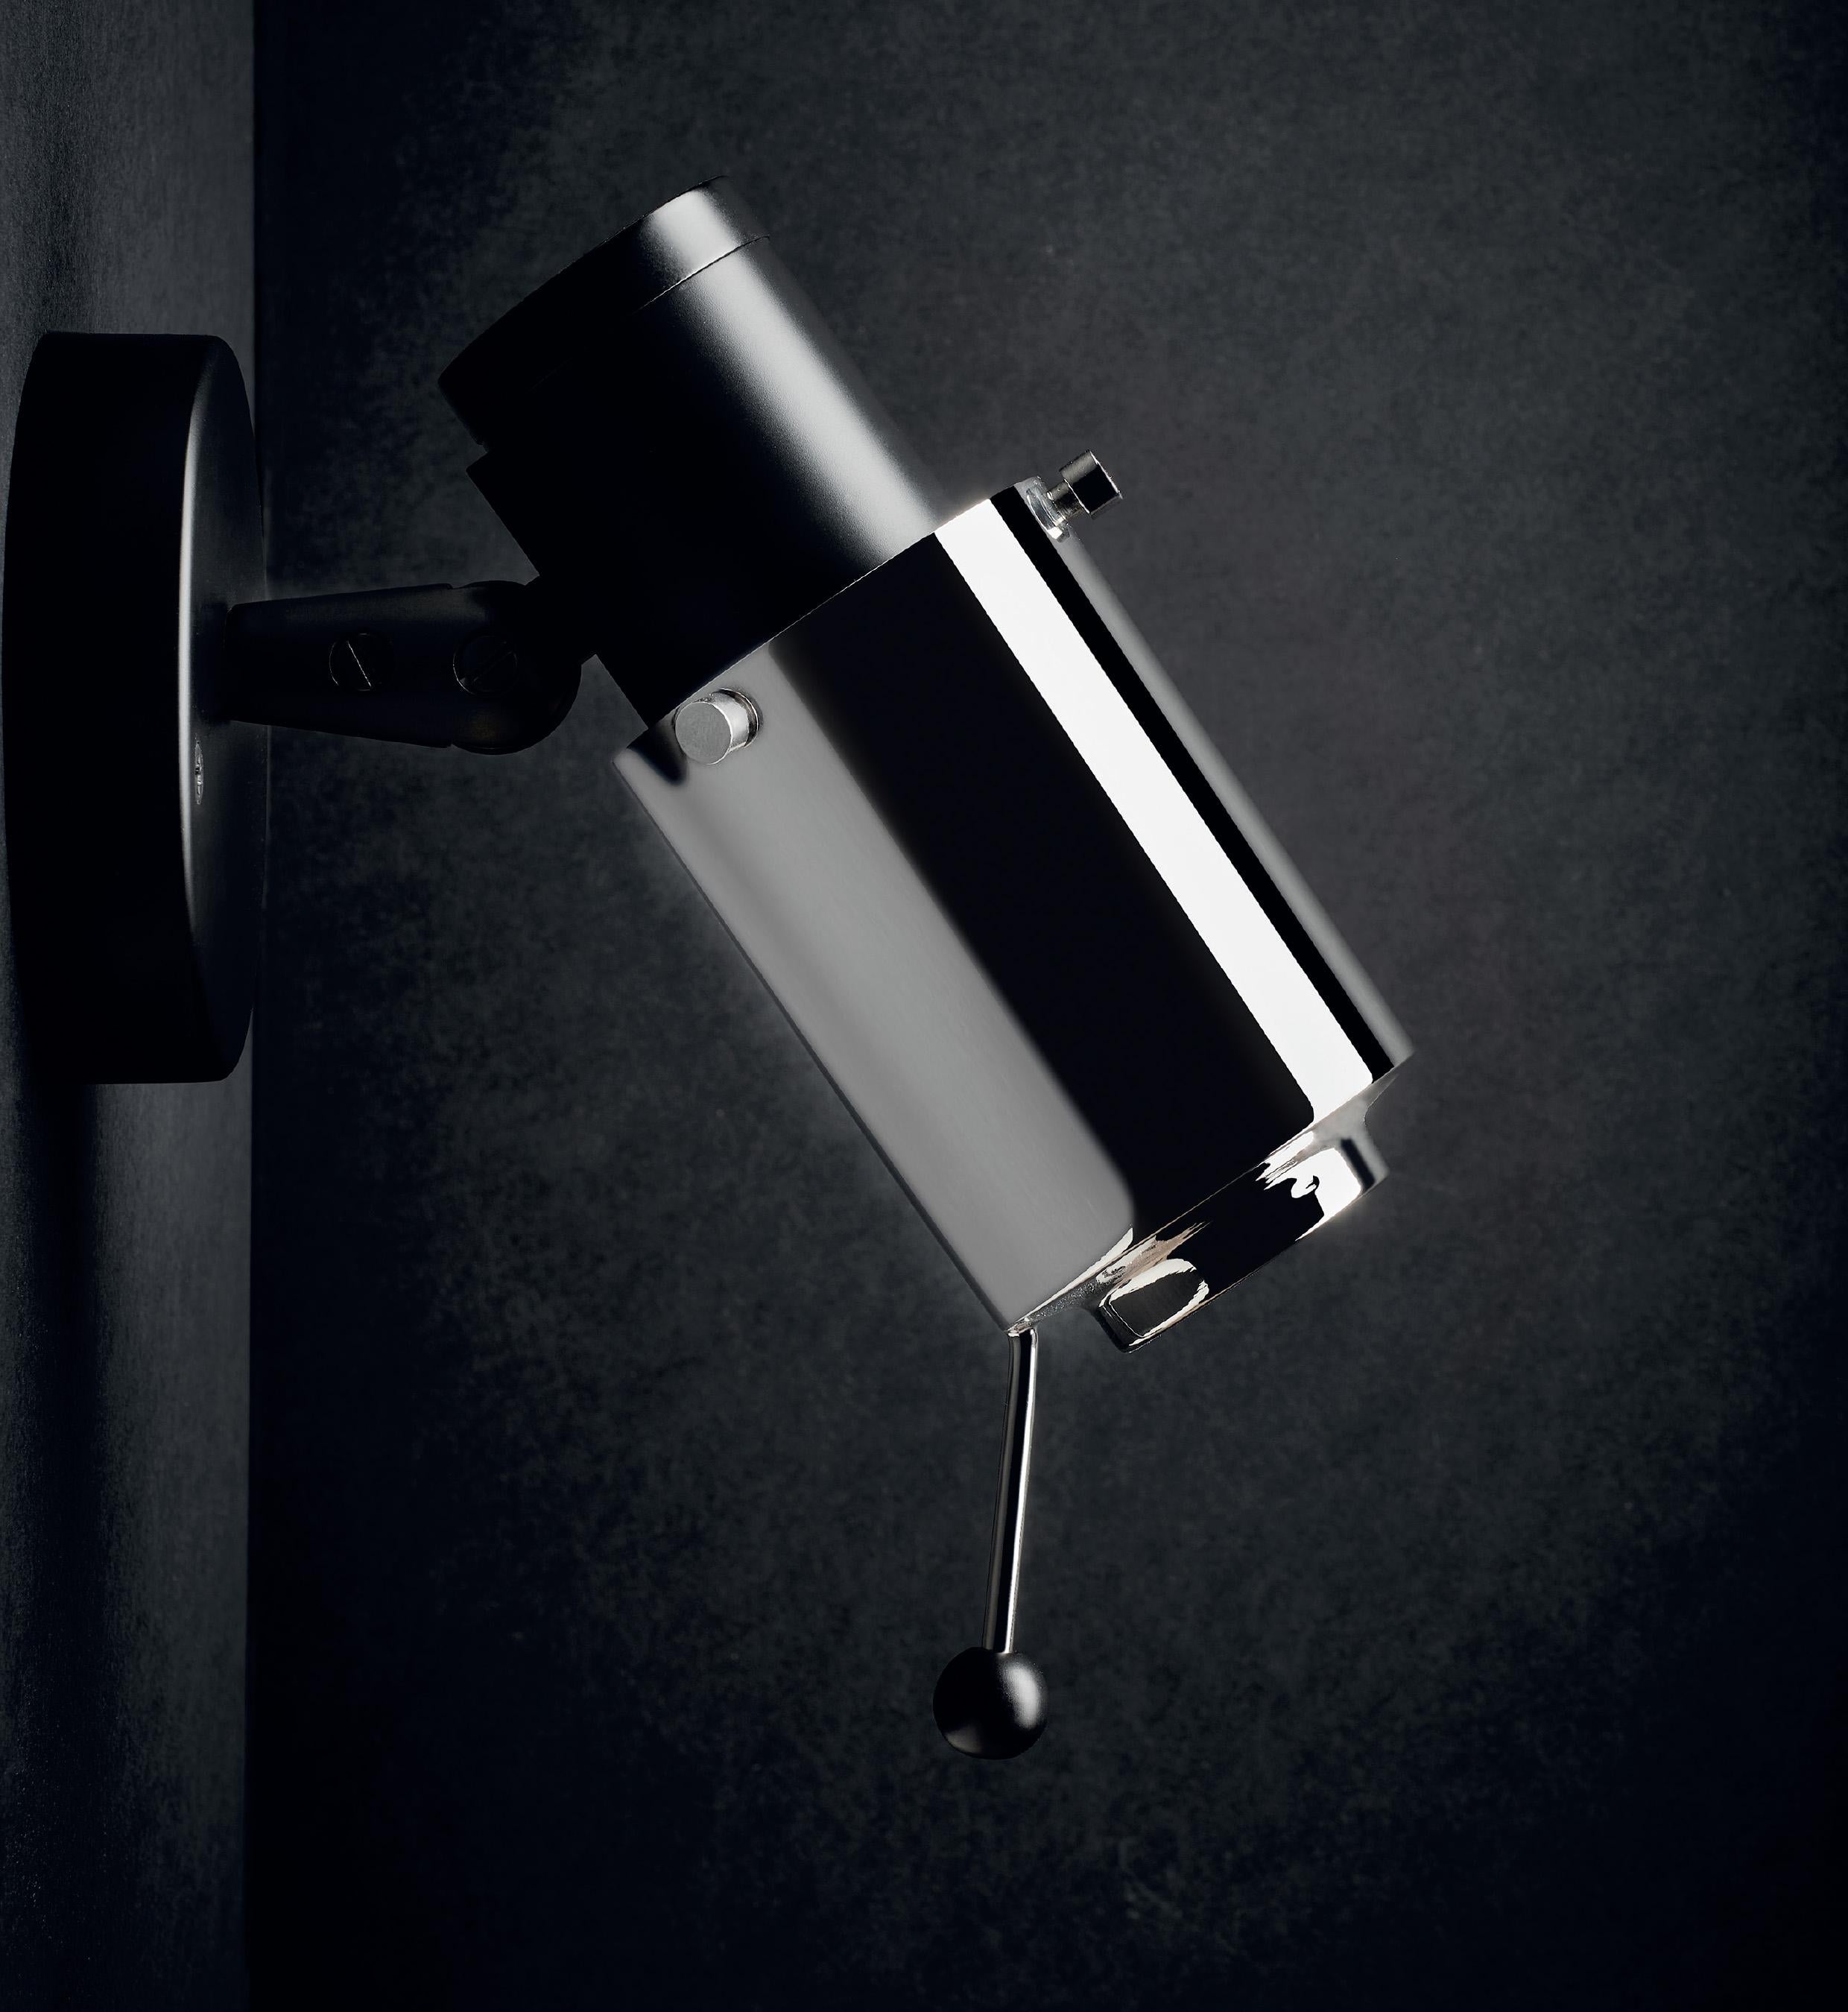 DCW Editions Biny Spot Bulb Wall Lamp in Black-Nickel Steel without Stick by Jacques Biny
 
 Straight out of a Jules Vernes or Melies world, the Biny Spot can direct and focus the light beam onto a specific area. The Biny Spot is composed of an